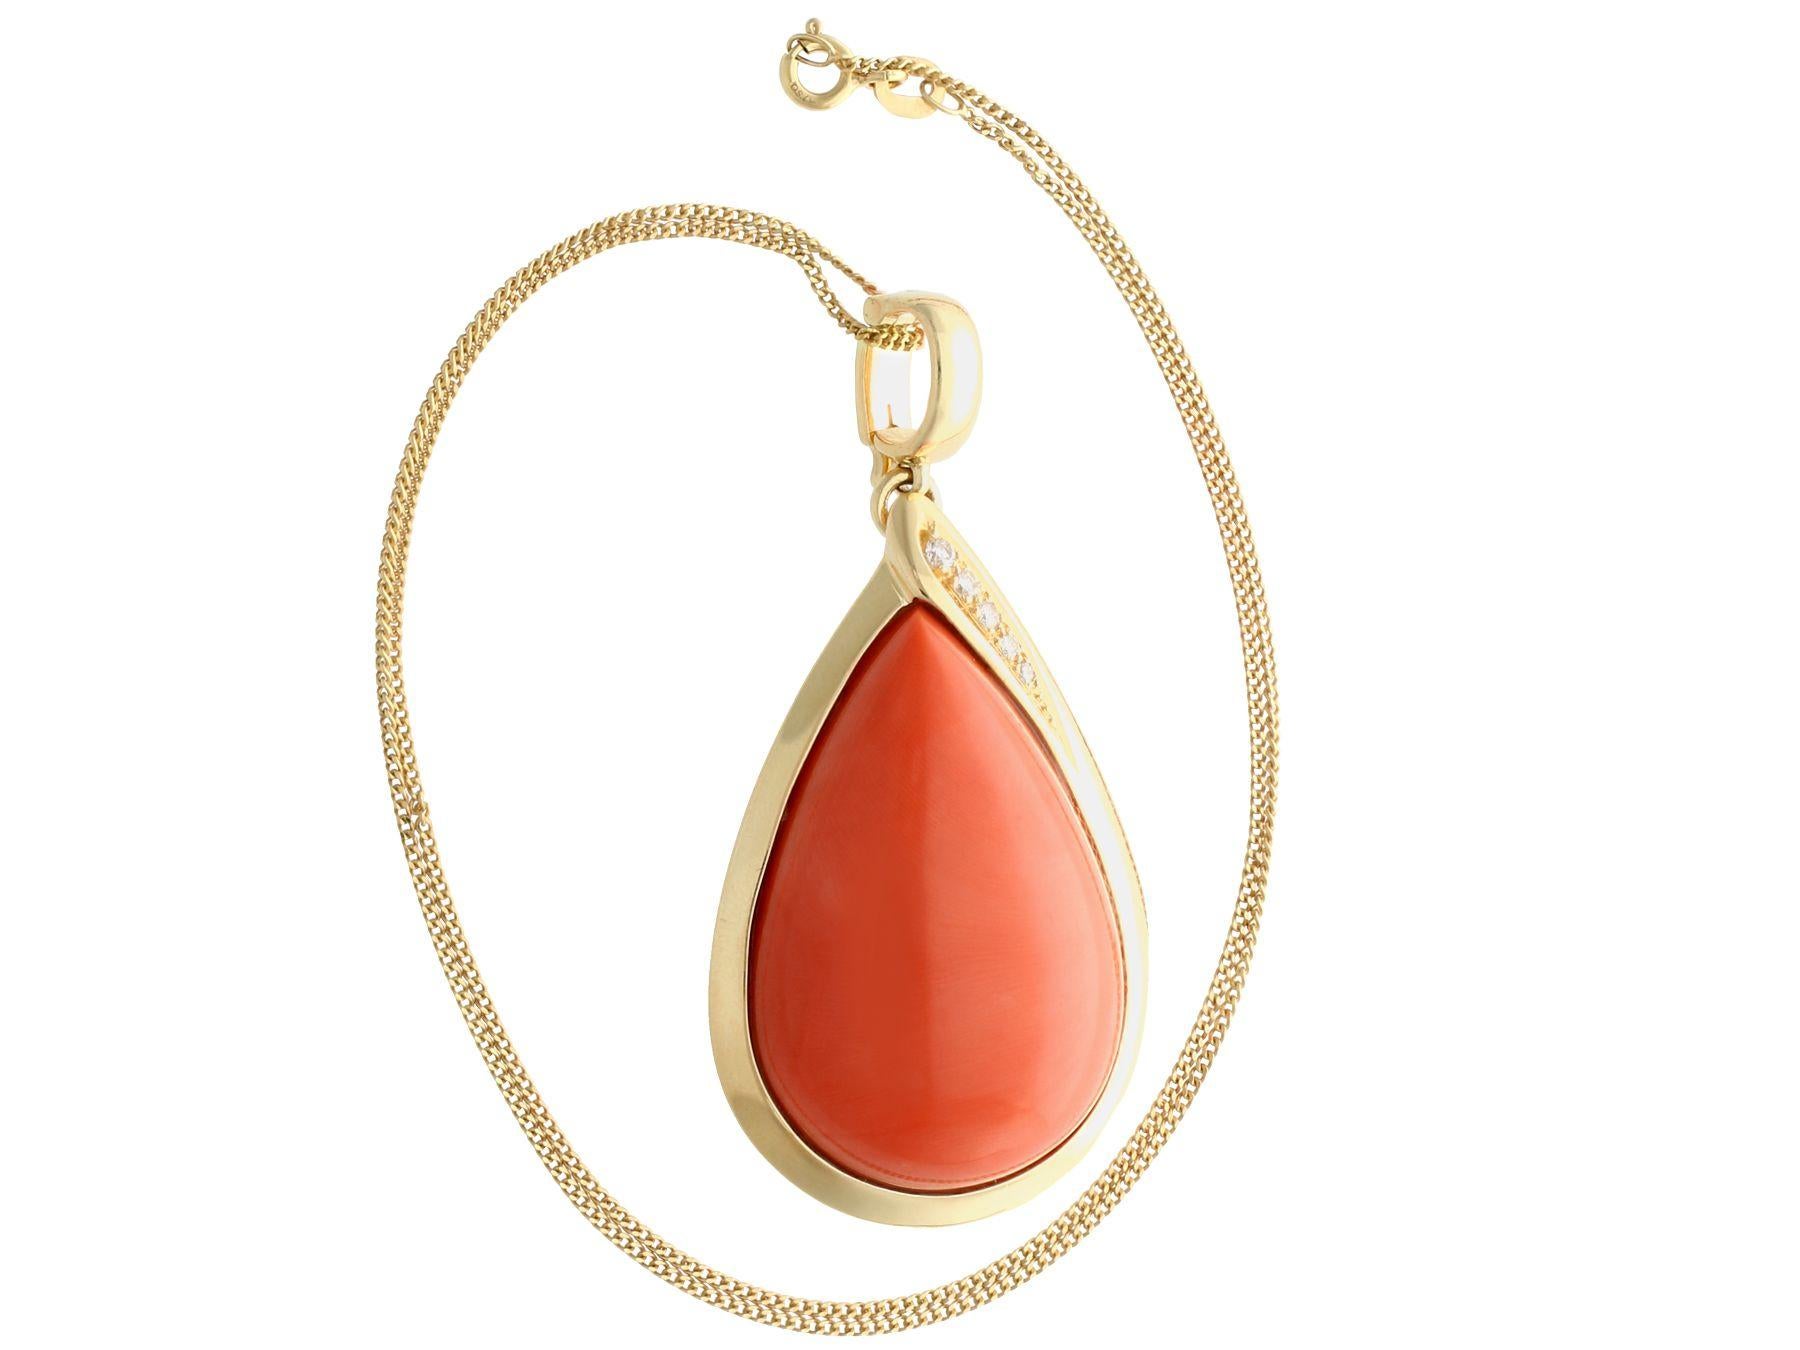 A stunning, fine and impressive, large vintage 59.14 carat coral and 0.17 carat diamond, 14k yellow gold pendant; part of our diverse vintage estate jewelry collections.

This fine and impressive vintage pendant has been crafted in 14k yellow